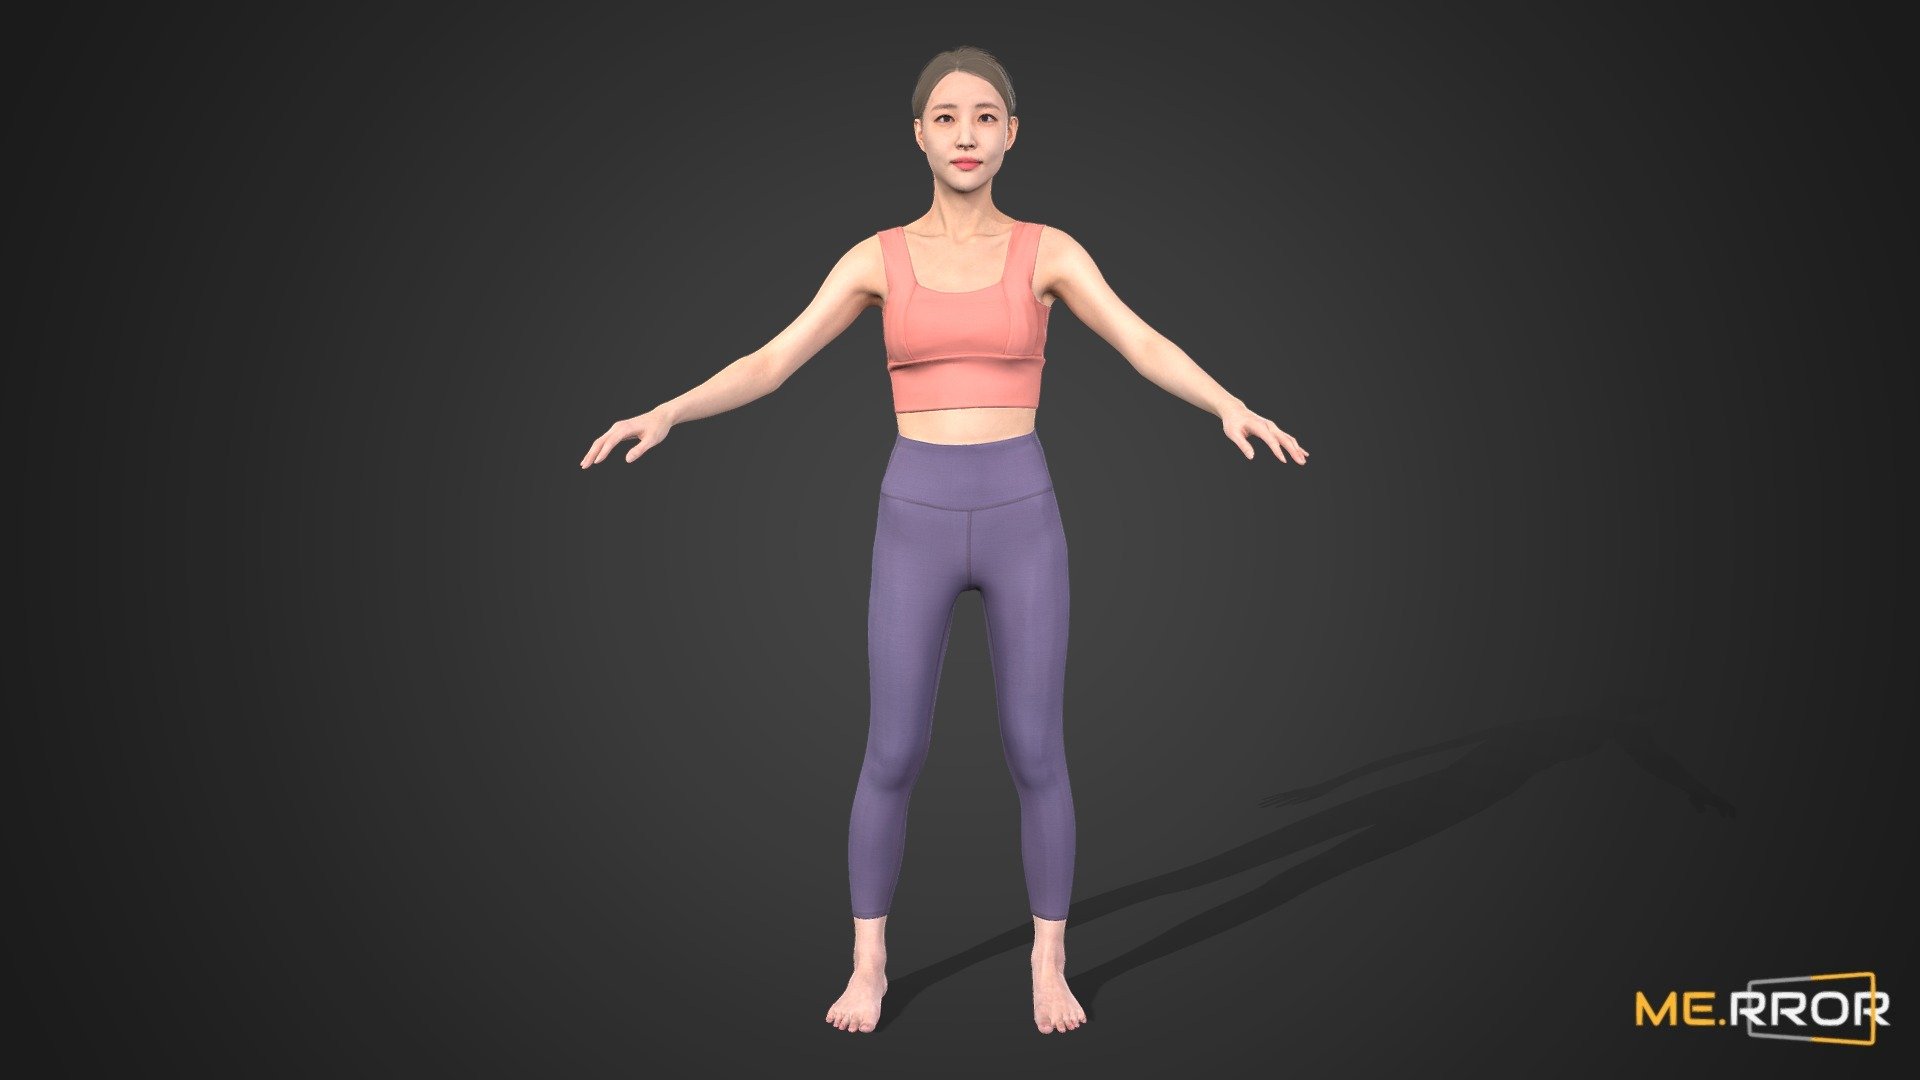 ME.RROR


From 3D models of Asian individuals to a fresh selection of free assets available each month - explore a richer diversity of photorealistic 3D assets at the ME.RROR asset store!

https://me-rror.com/store




[Model Info]




Model Formats : FBX, MAX

Texture Maps (8K) : Diffuse, Normal

Texture Maps (4K) : Hair Diffuse, Alpha

You can buy this model at https://me-rror.com/asset/human/asset866

If you encounter any problems using this model, please feel free to contact us. We'd be glad to help you.



[About ME.RROR]

Step into the future with ME.RROR, South Korea's leading 3D specialist. Bespoke creations are not just possible; they are our specialty.

Service areas:




3D scanning

3D modeling

Virtual human creation

Inquiries: https://merror.channel.io/lounge - [Game-ready] Asian Woman Scan A-Posed 7 - Buy Royalty Free 3D model by ME.RROR (@merror) 3d model